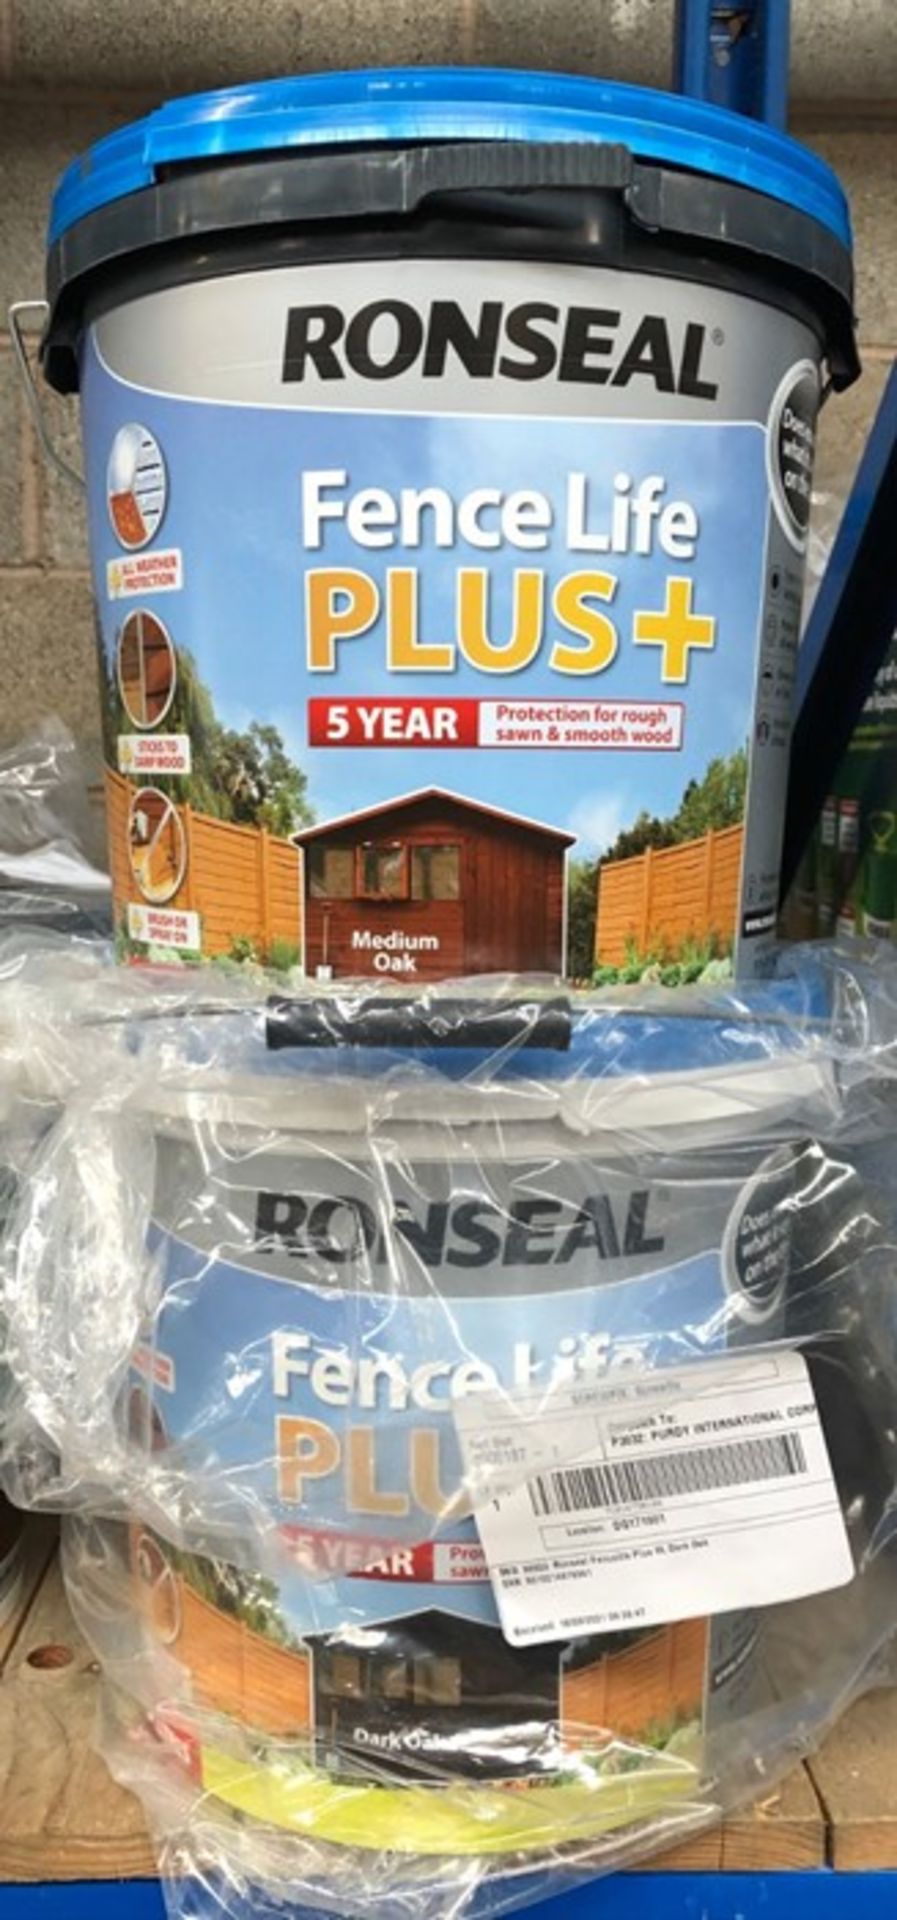 5 X 9L TUBS OF RONSEAL FENCE LIFE PLUS+ PAINT - COLOURS VARY / CUSTOMER RETURNS